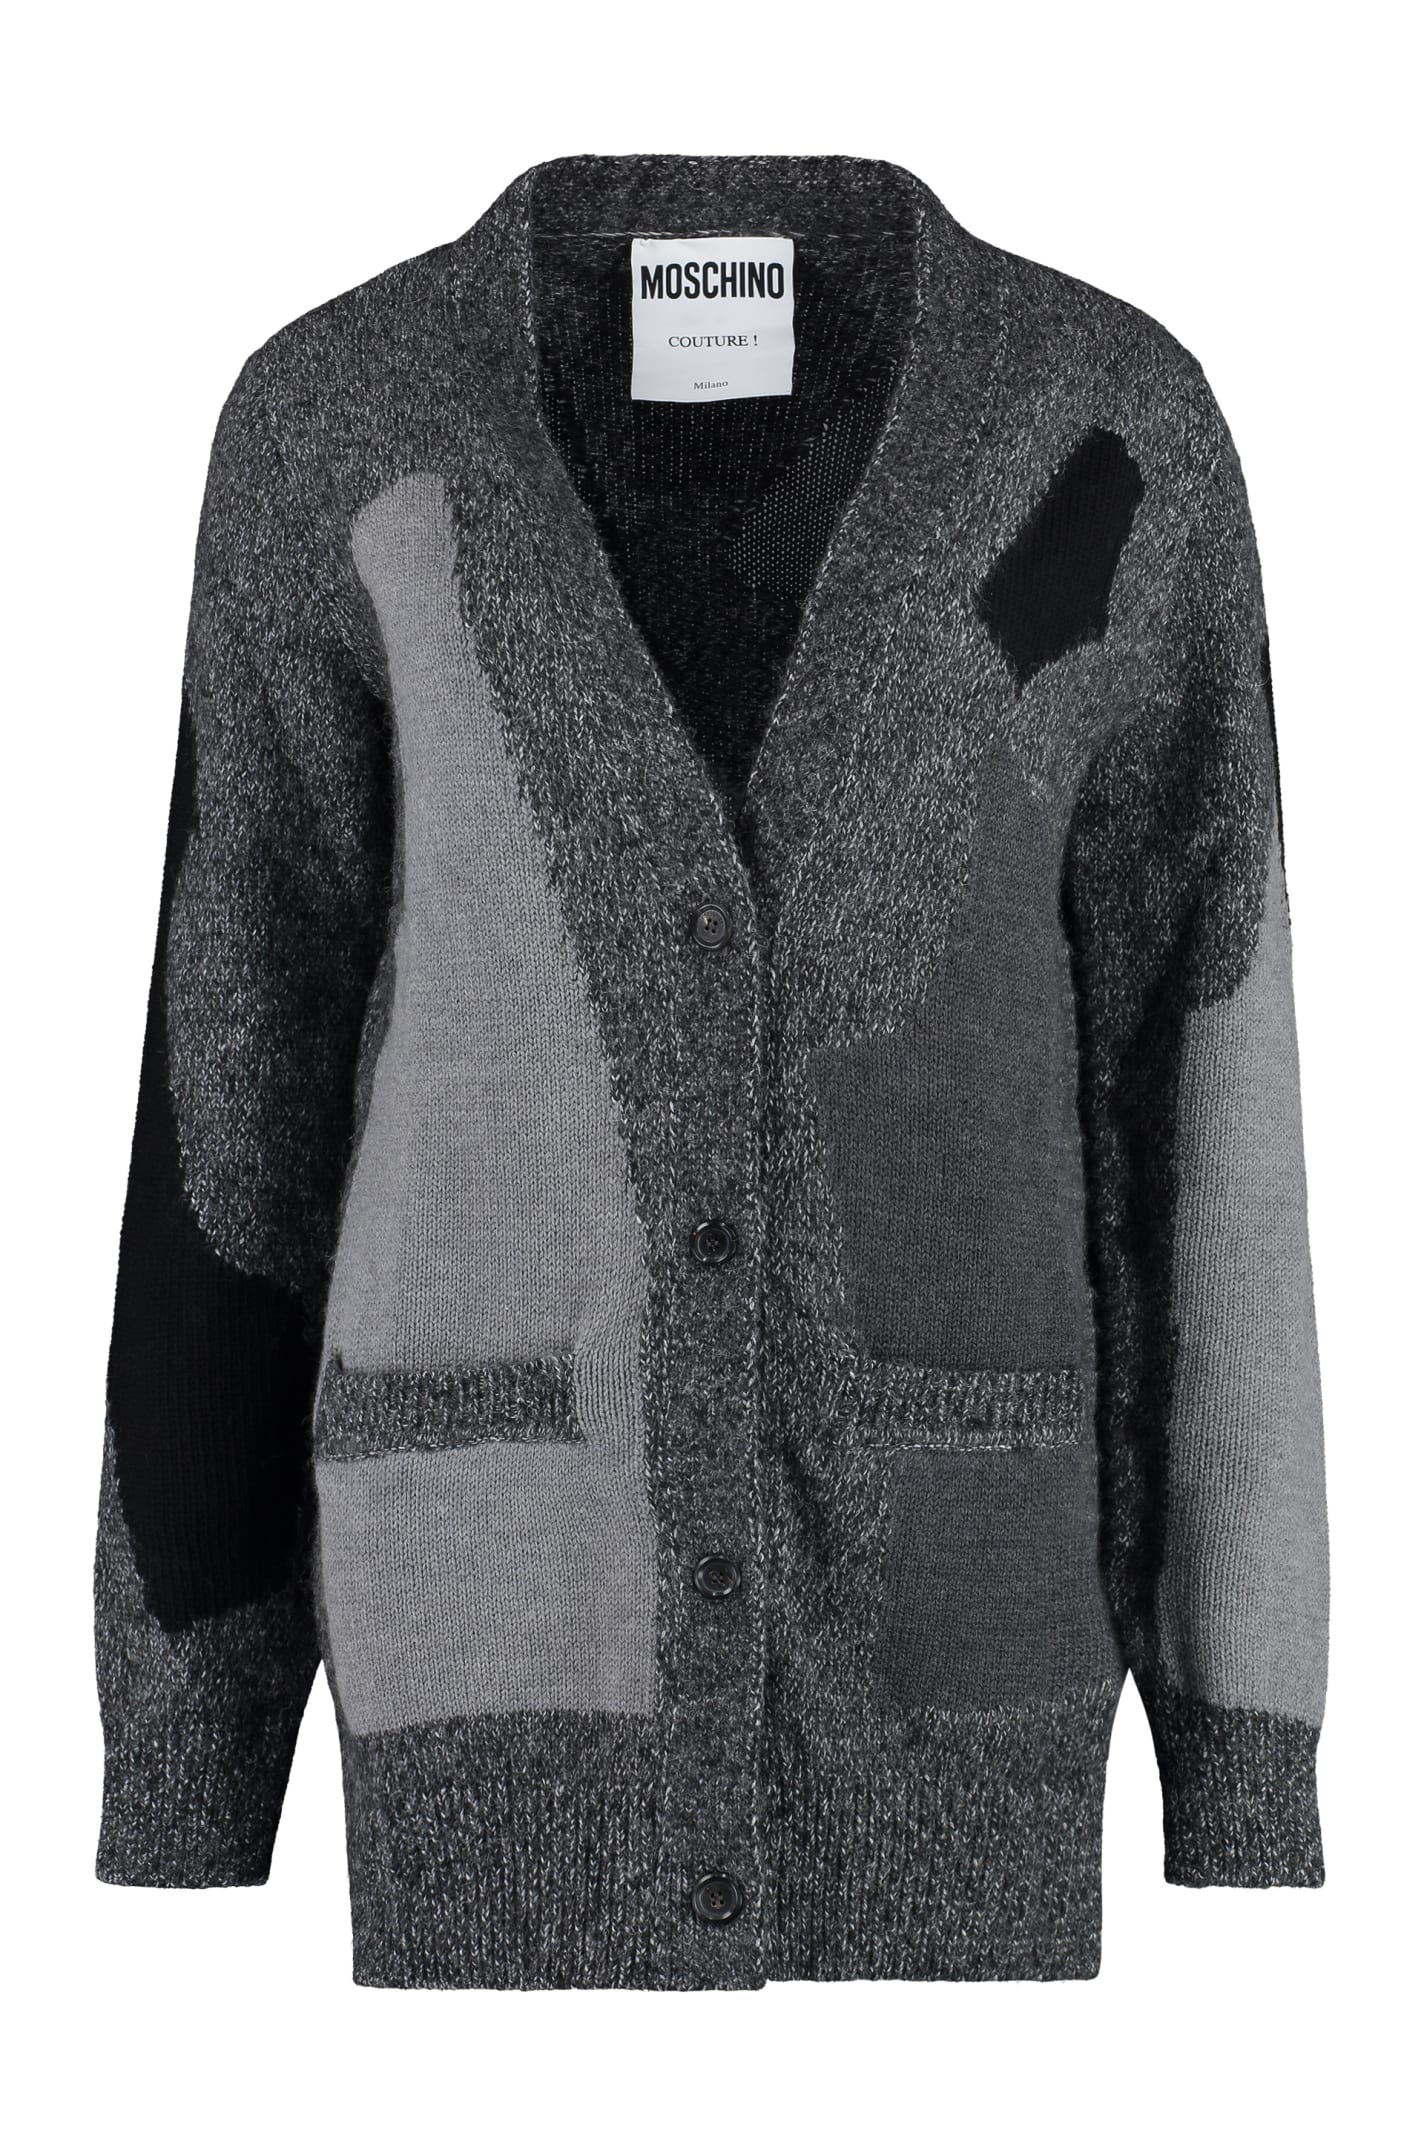 Moschino Knitted Cardigan In Grey